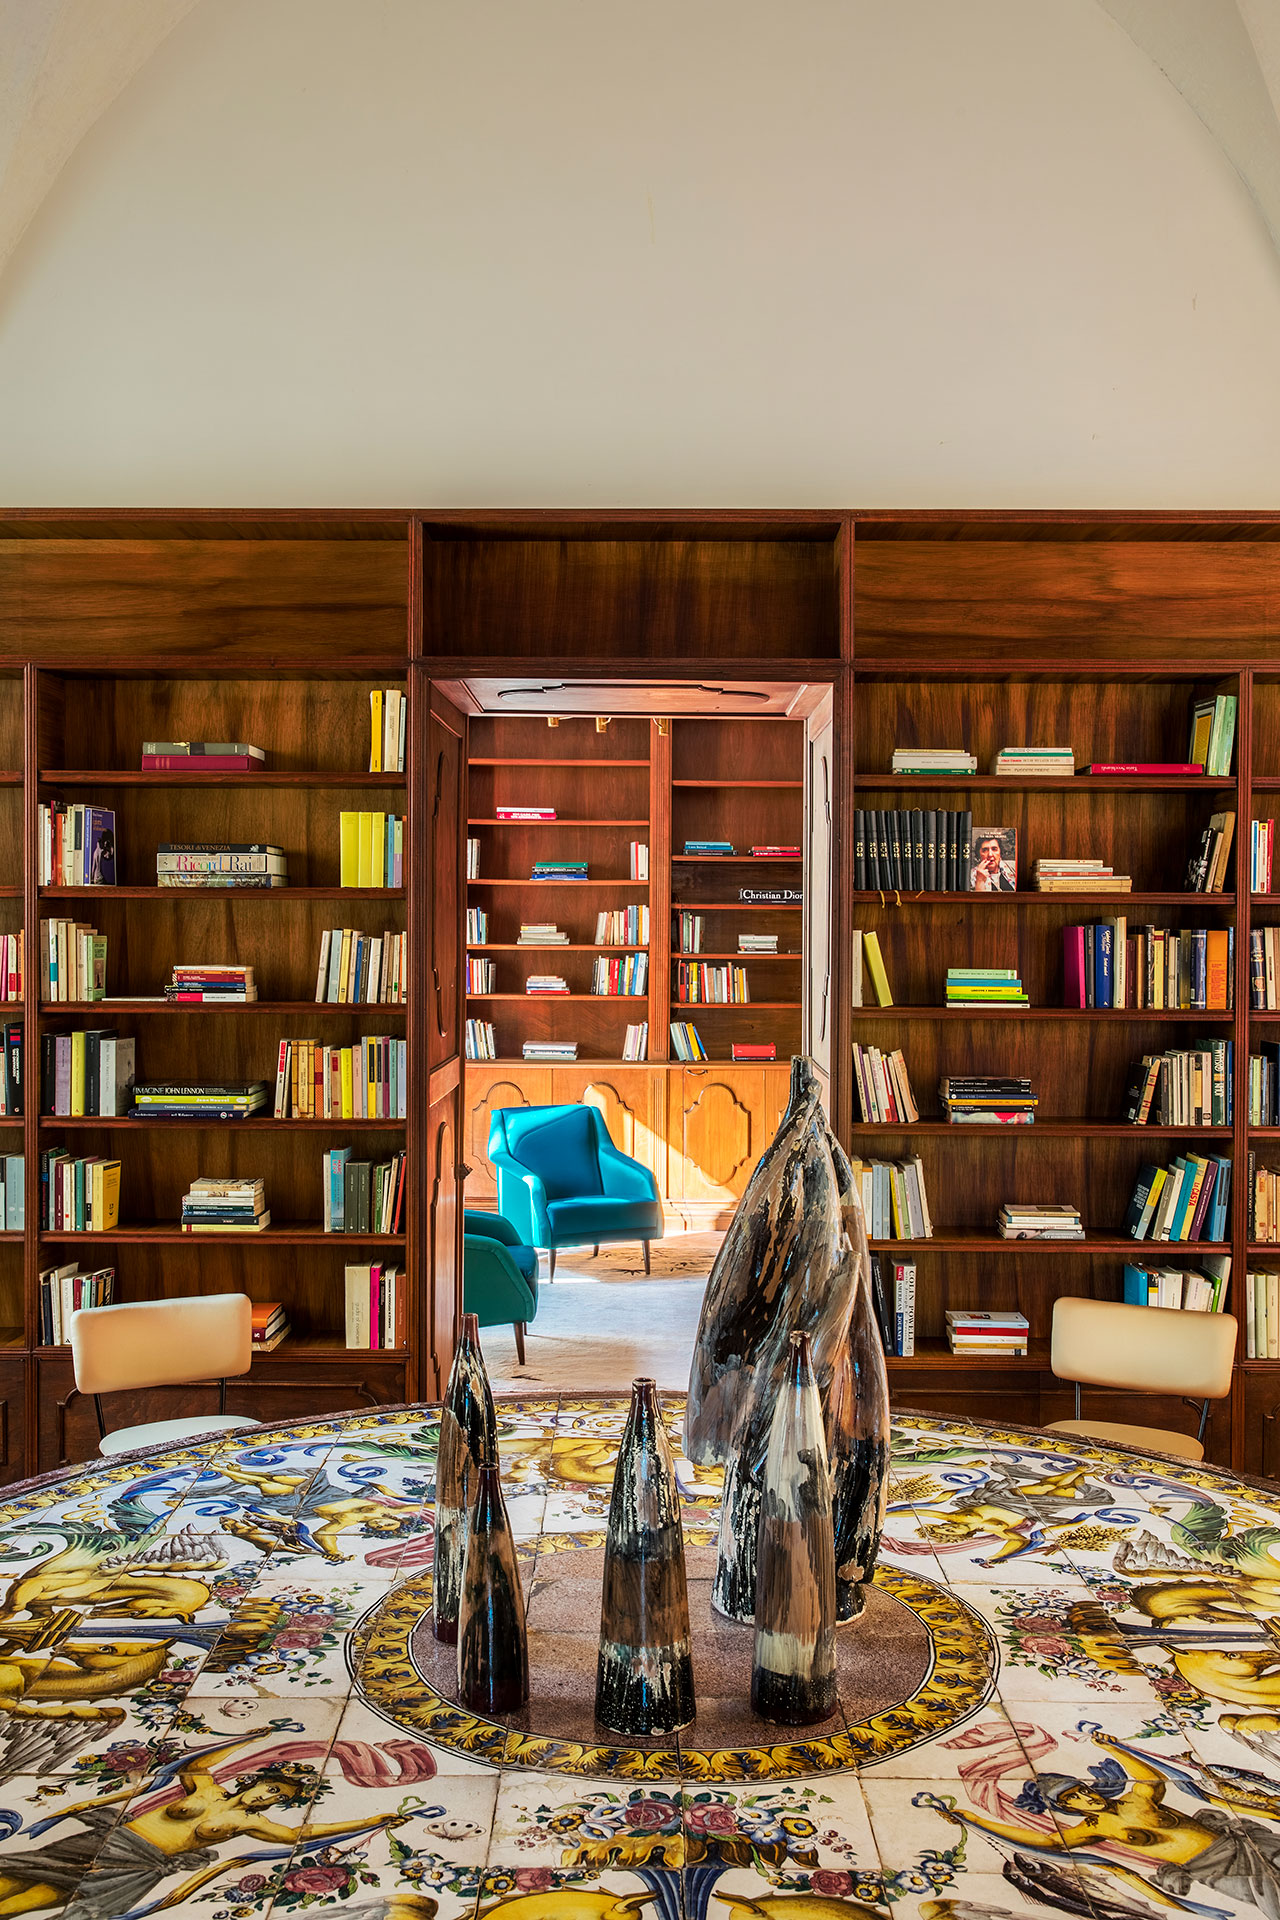 De Secly's Library. Photography by Helenio Barbetta.